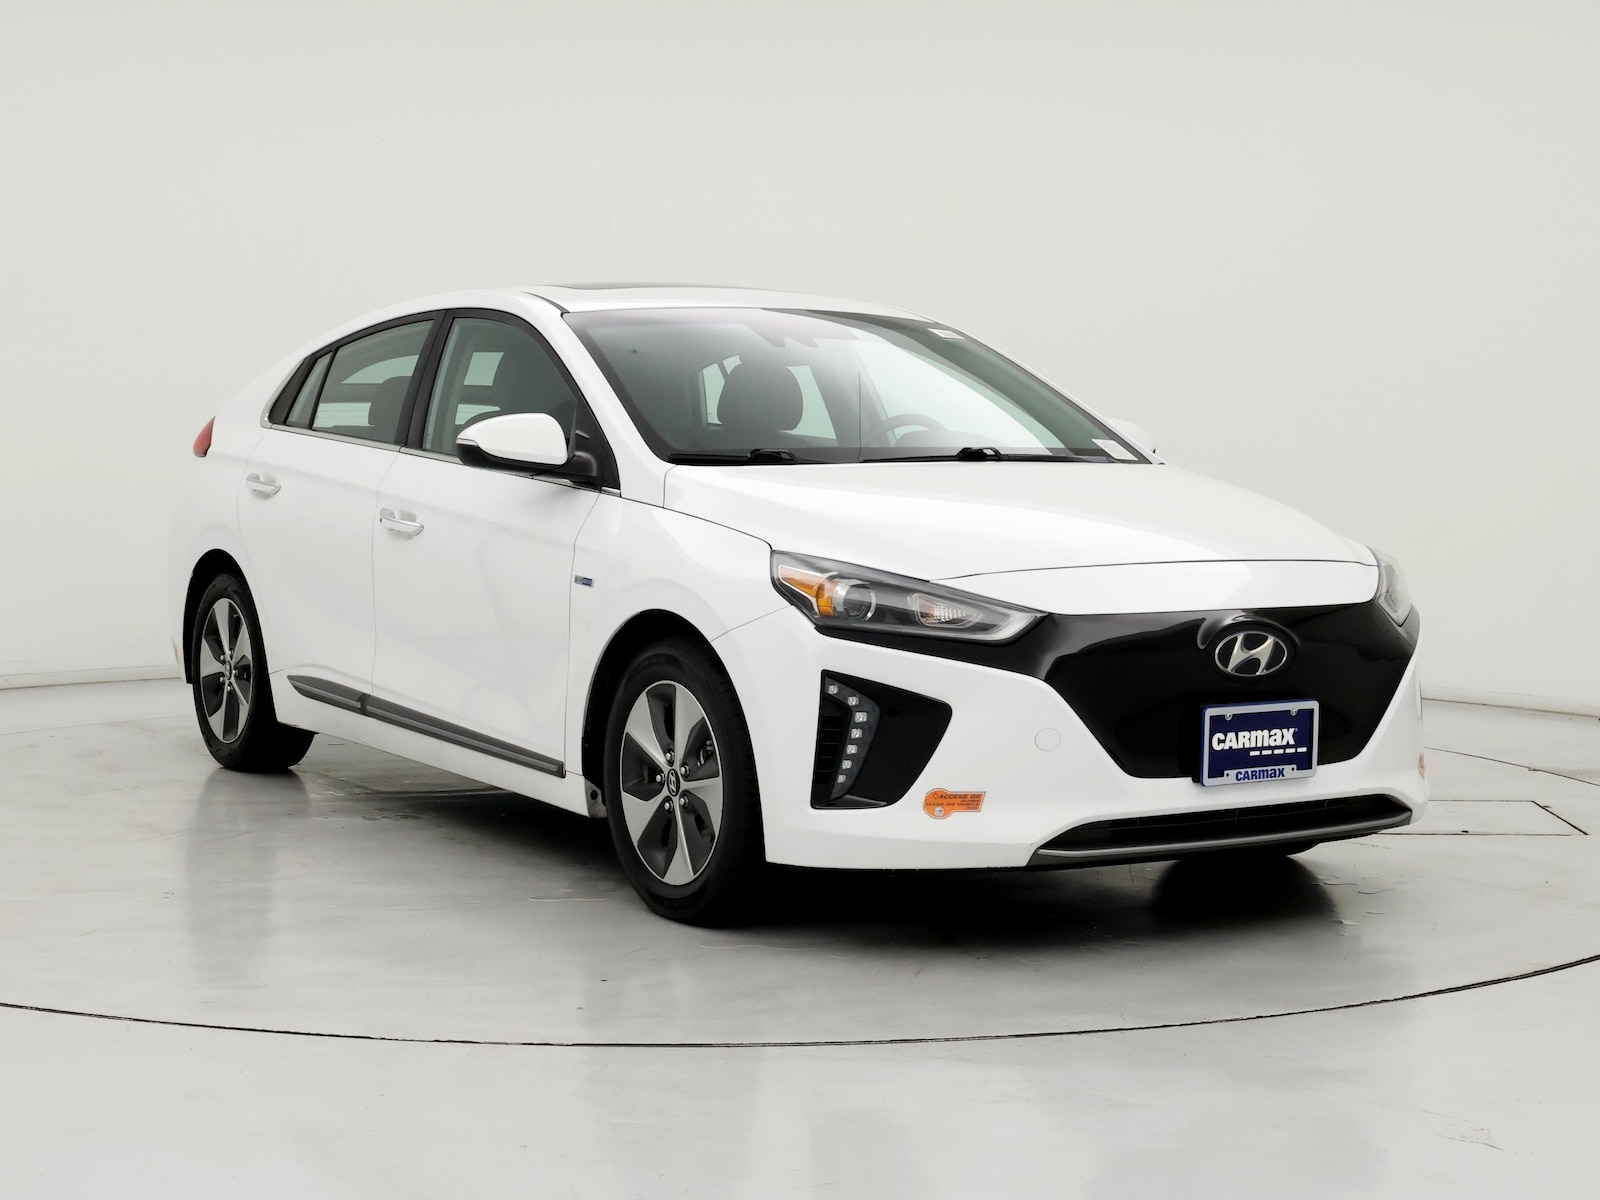 Used 2019 Hyundai Ioniq Limited with VIN KMHC05LHXKU035728 for sale in Kenosha, WI